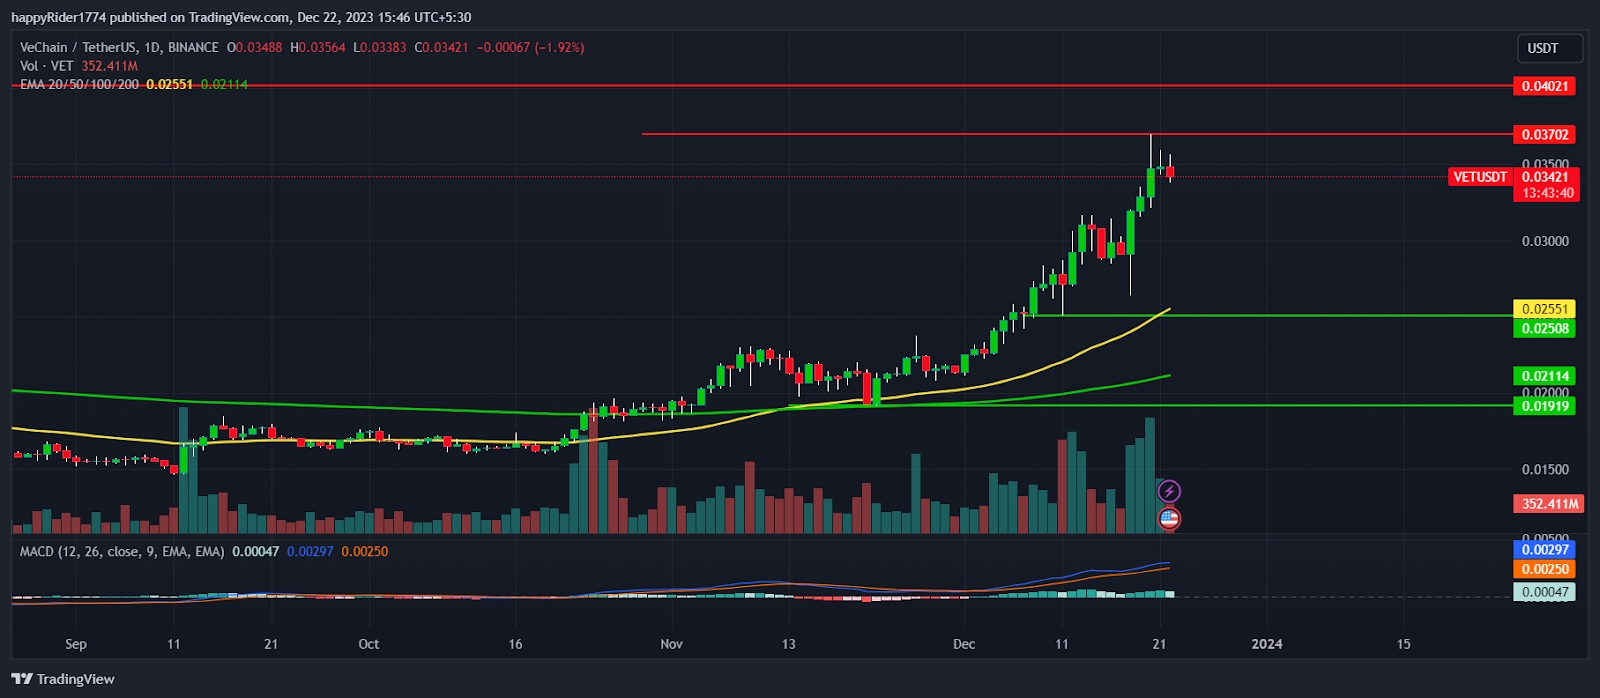 VeChain Price Rose 60% in Dec and Surpassed YTD High; What Next?